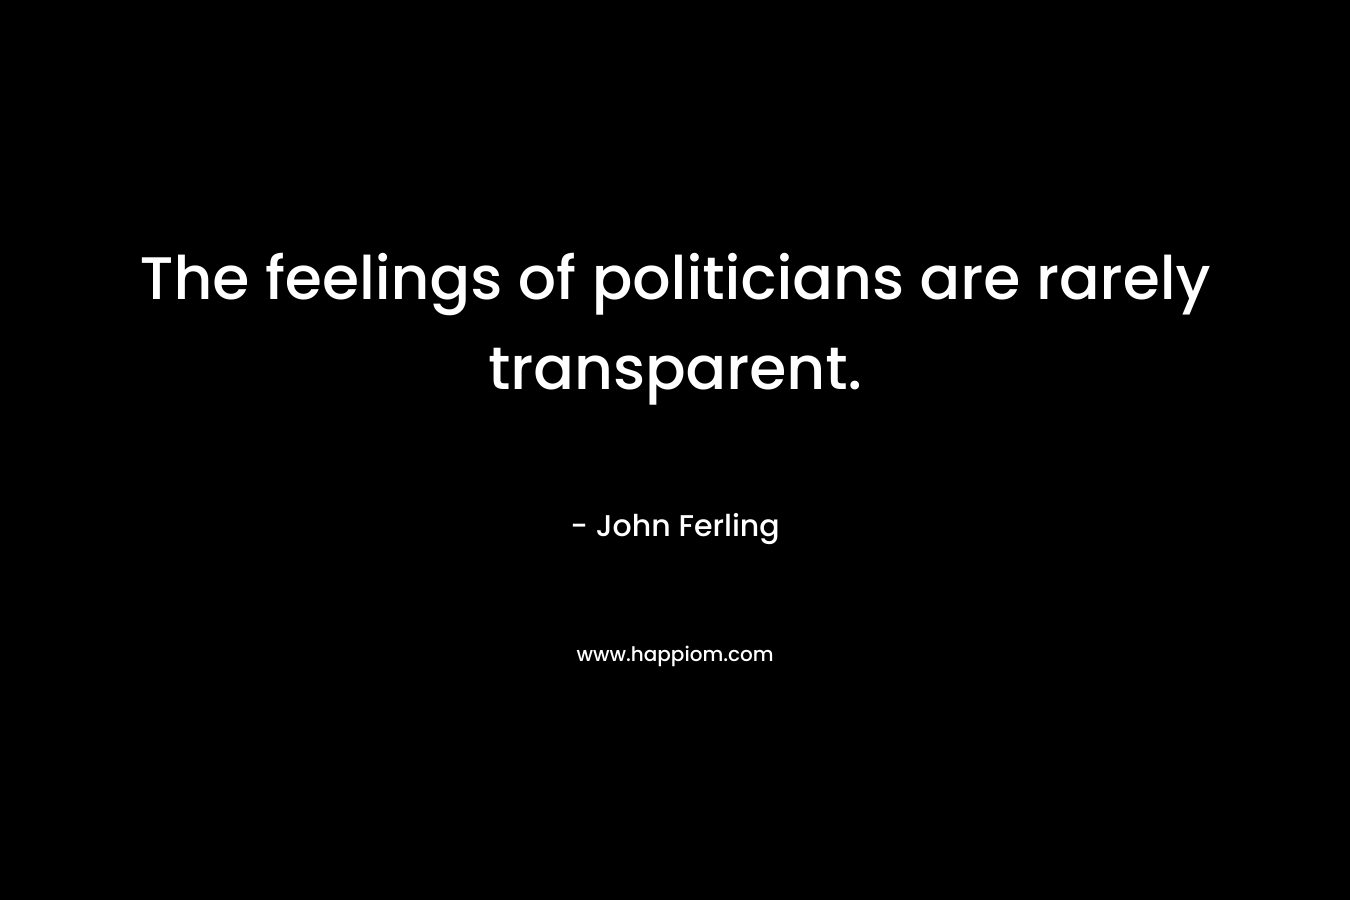 The feelings of politicians are rarely transparent.